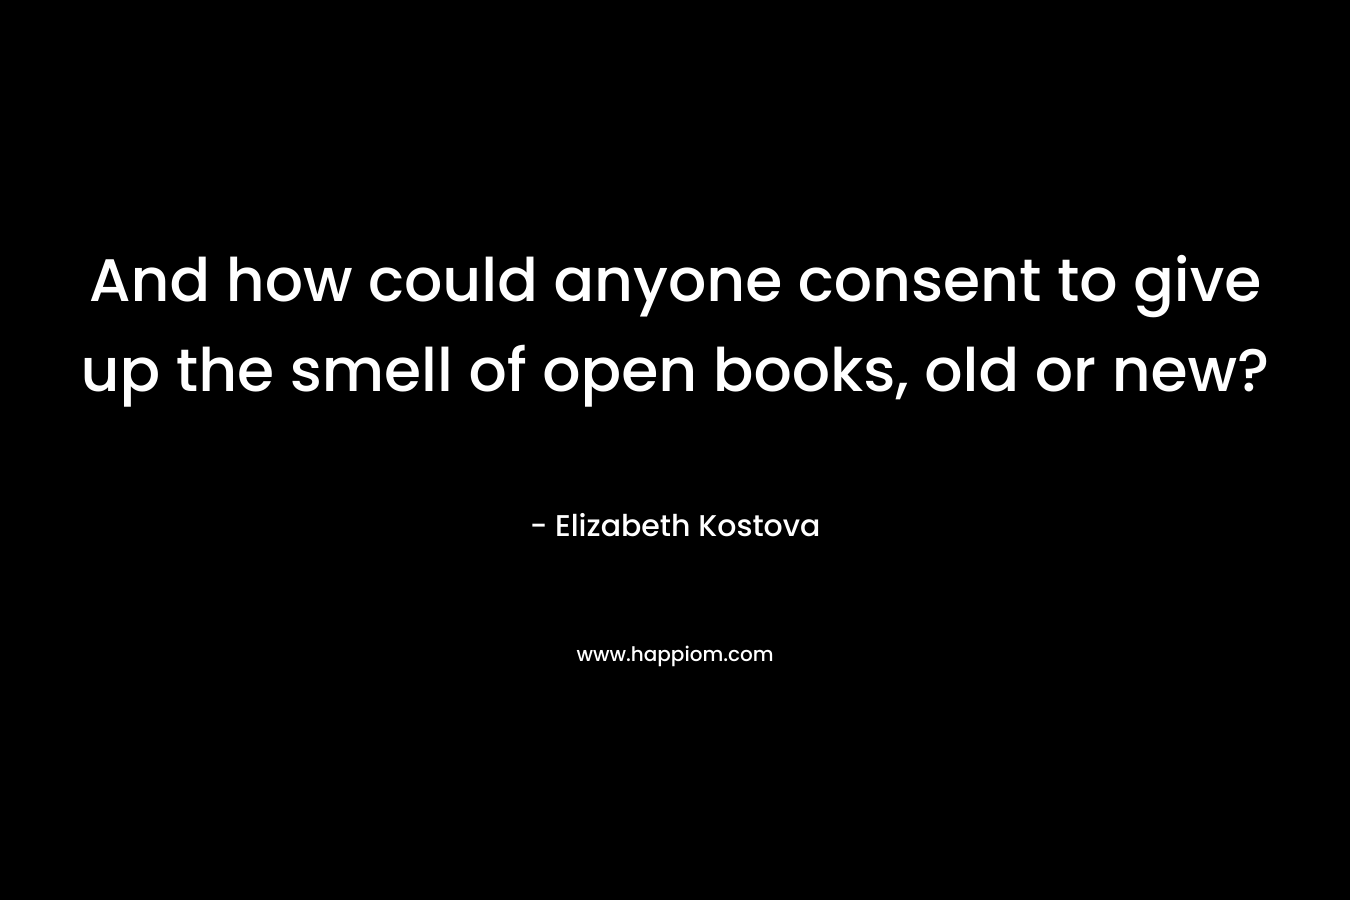 And how could anyone consent to give up the smell of open books, old or new?